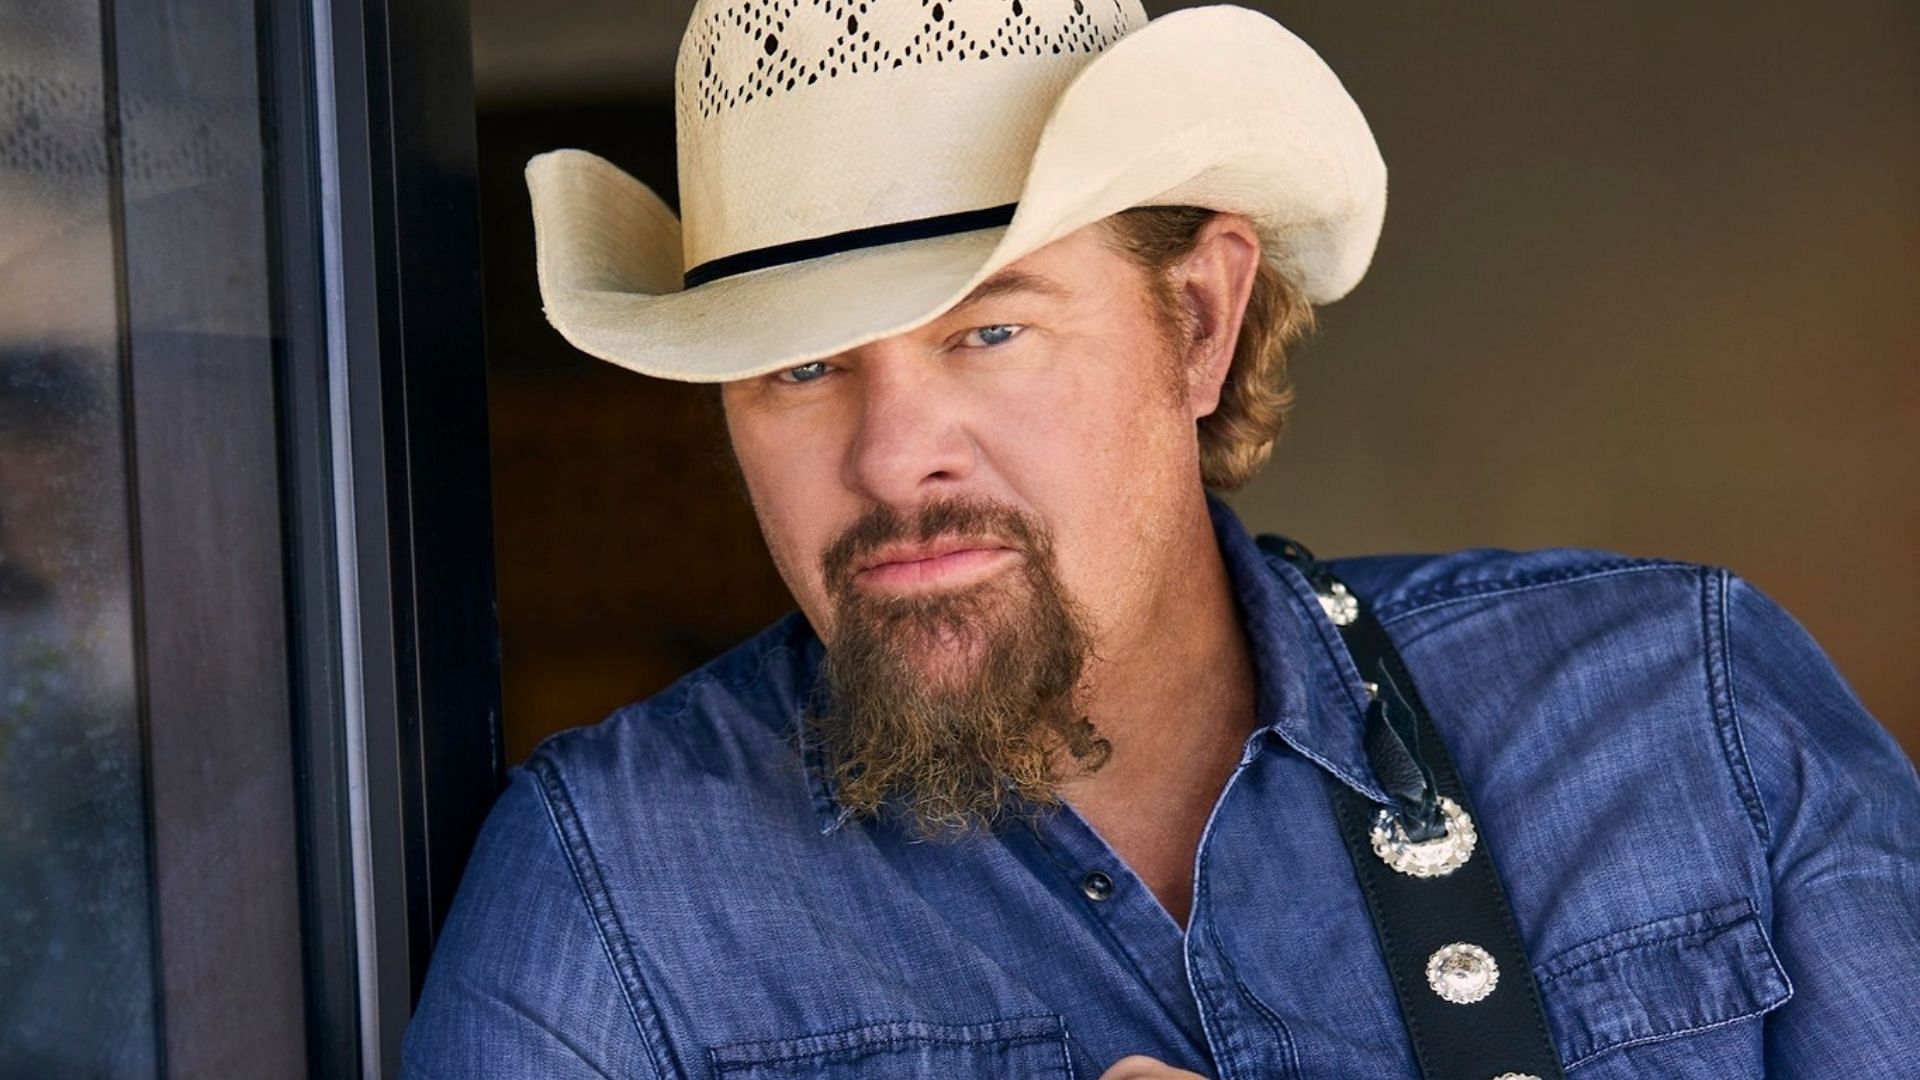 Toby Keith. has passed away aged 62 (Image via Facebook)